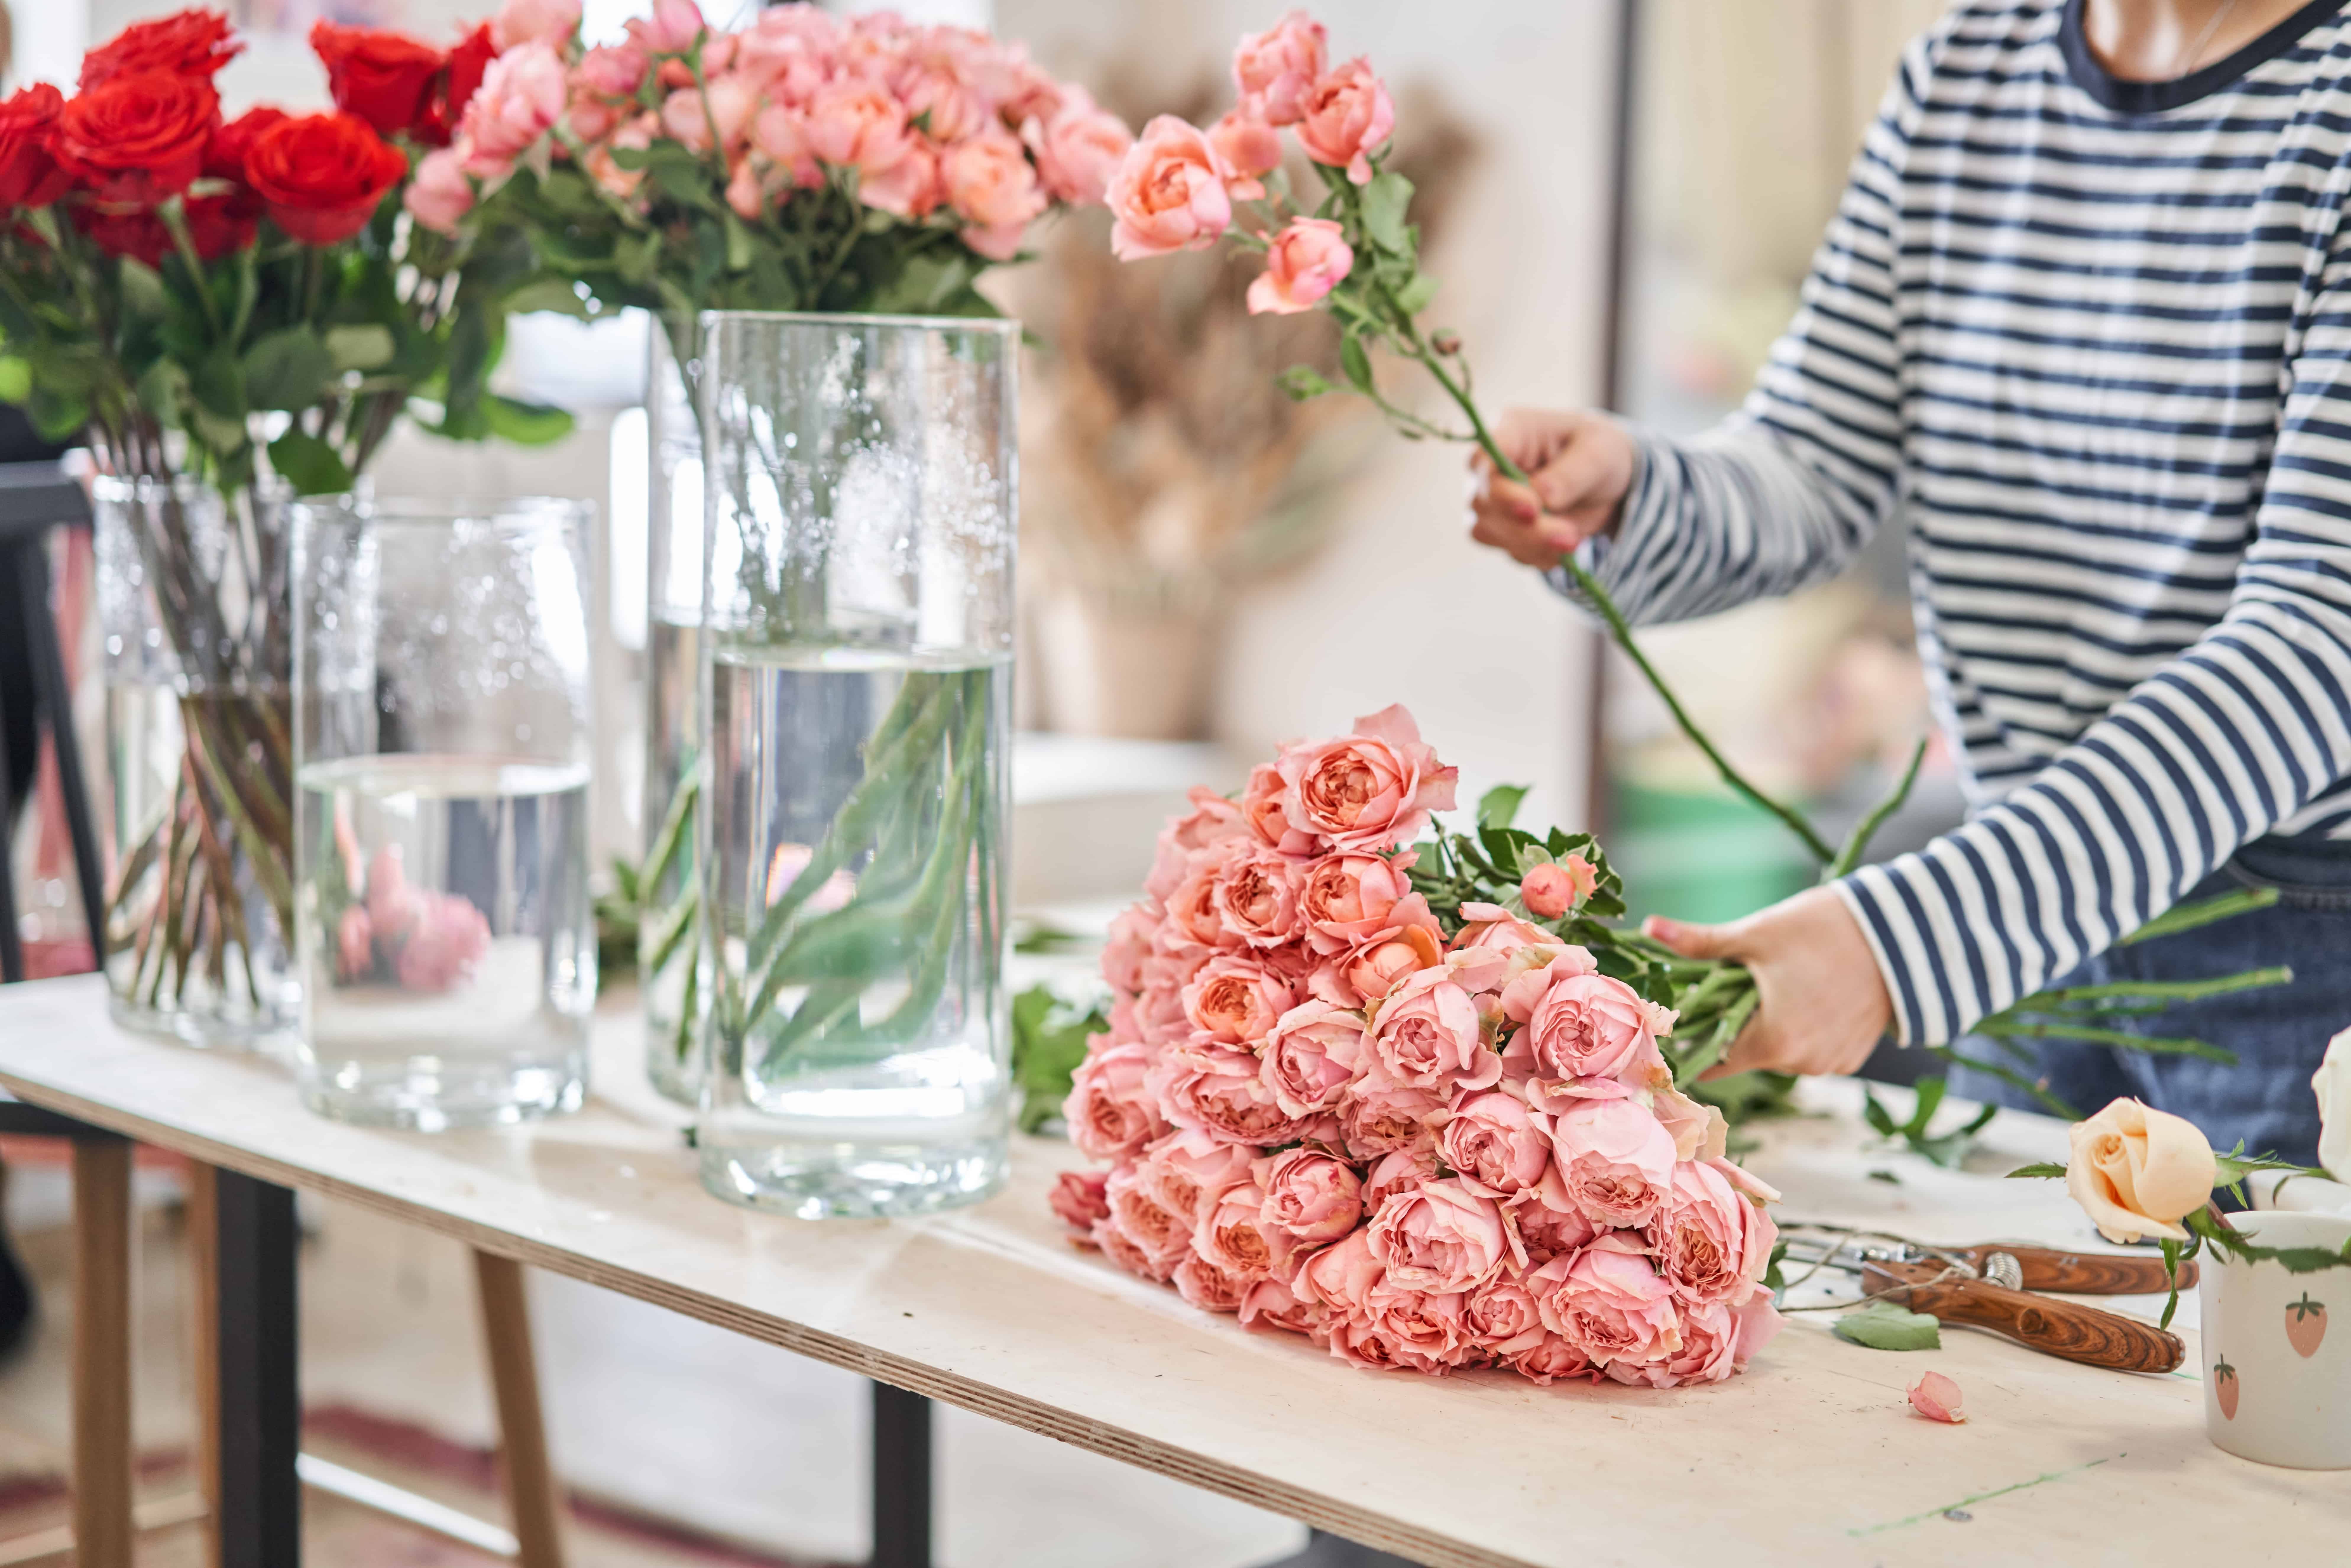 What to Do with Flowers After an Event